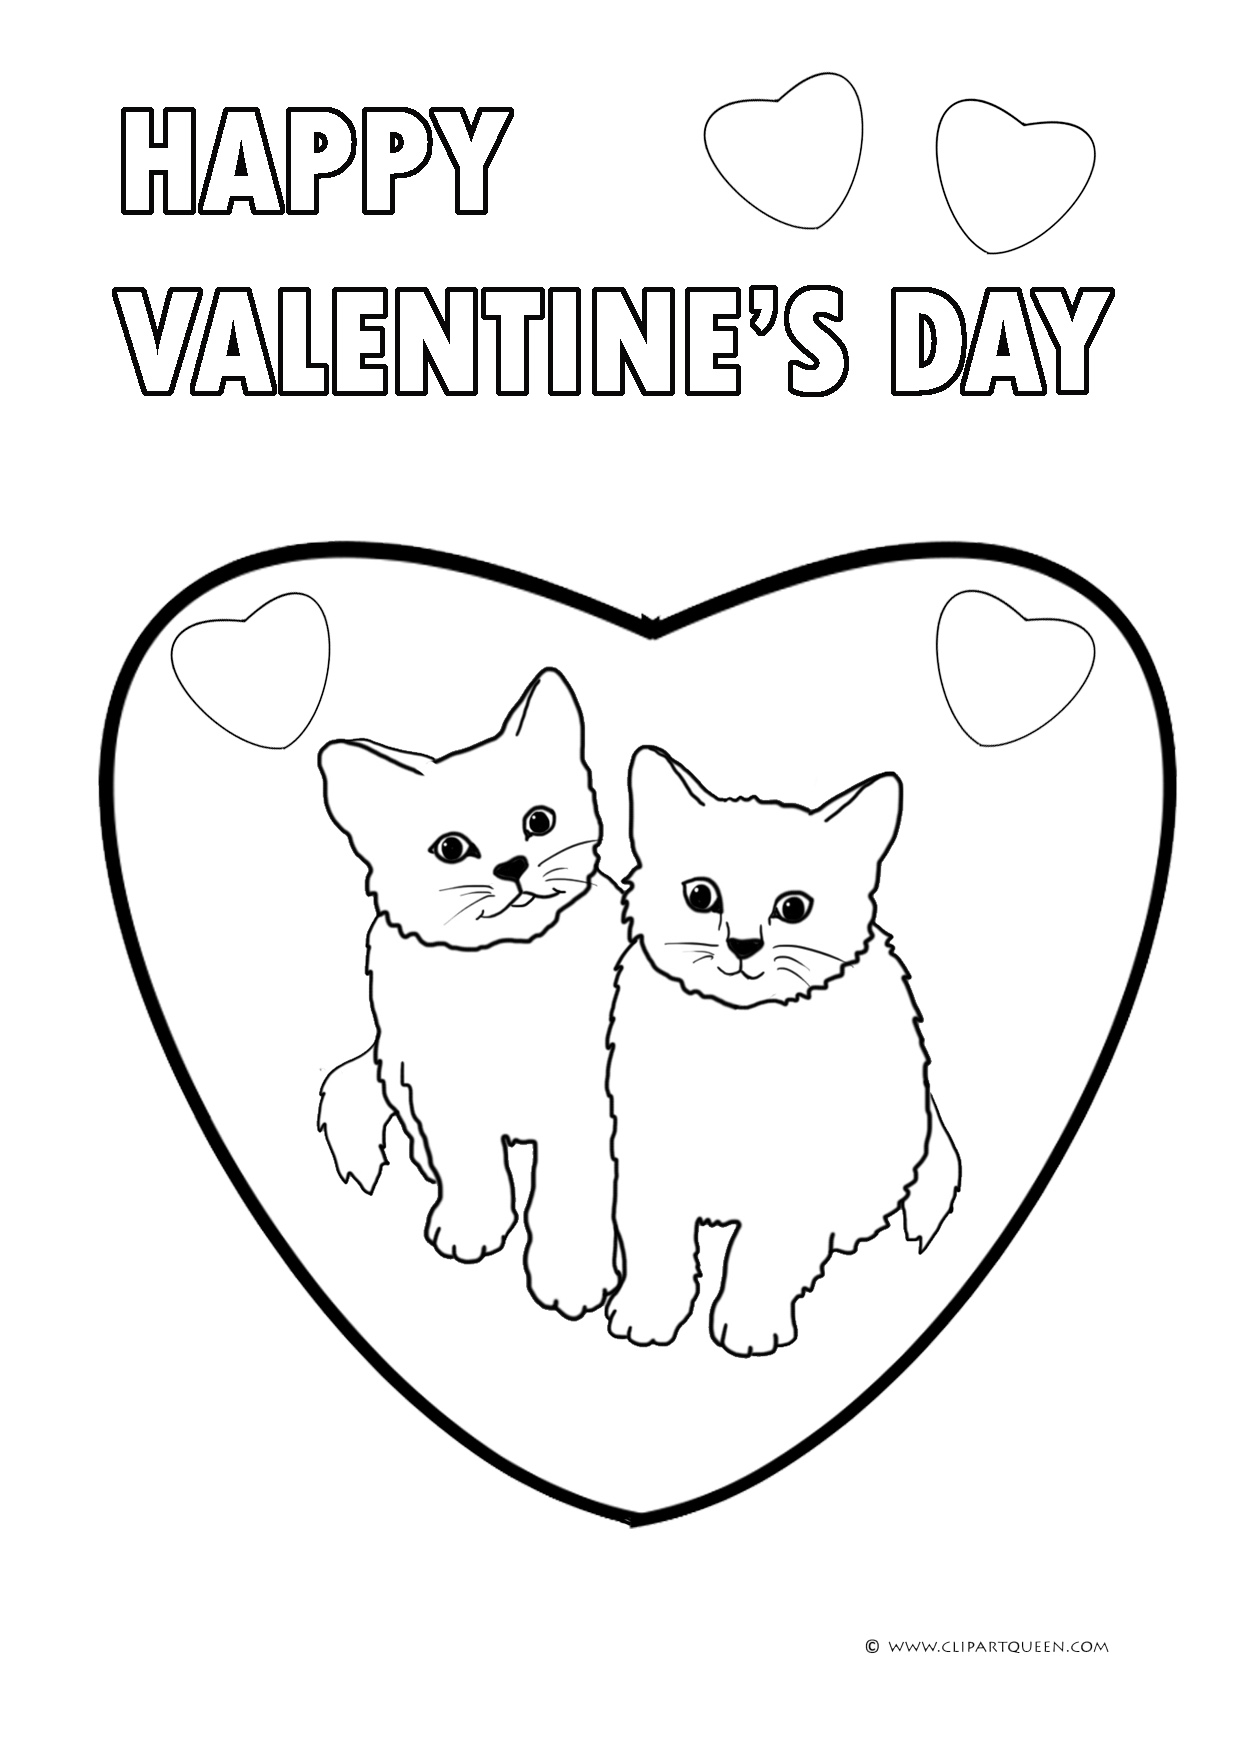 Download 15 Valentine's Day coloring pages